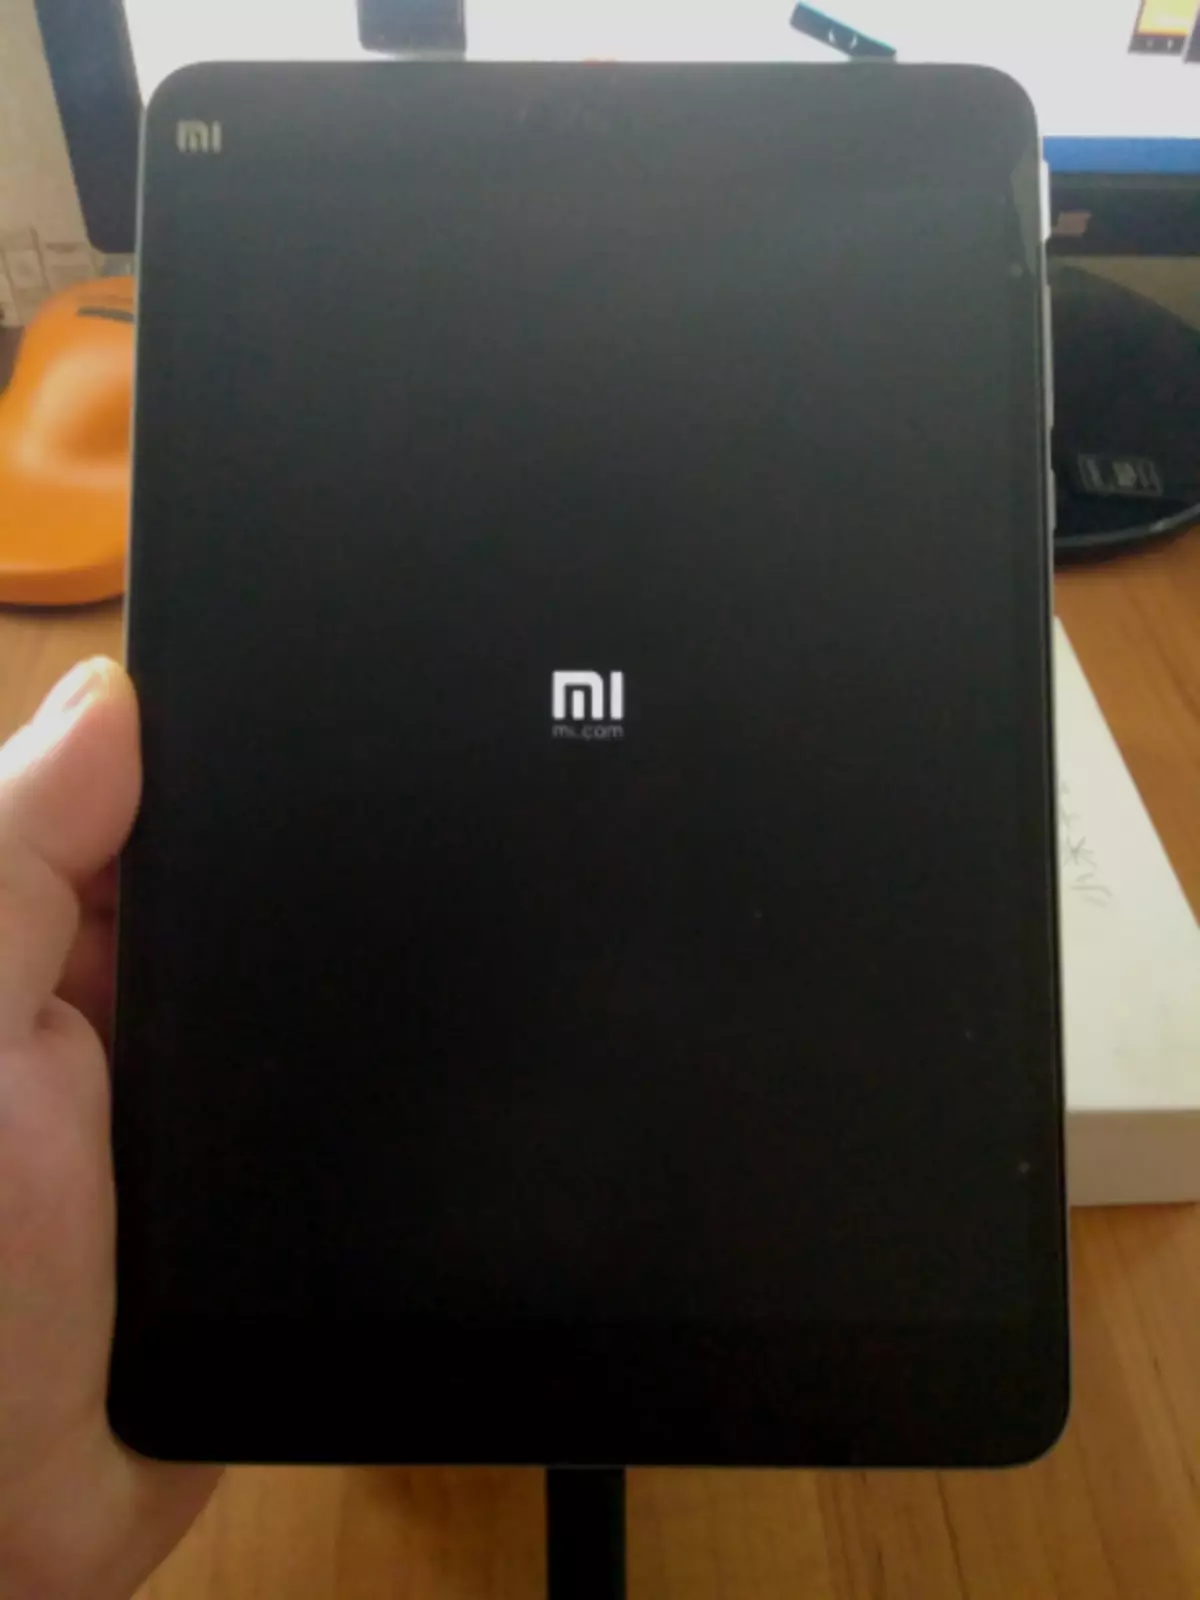 Xiaomi MiPad 2 Starting tablet from flash drives to install windows 10